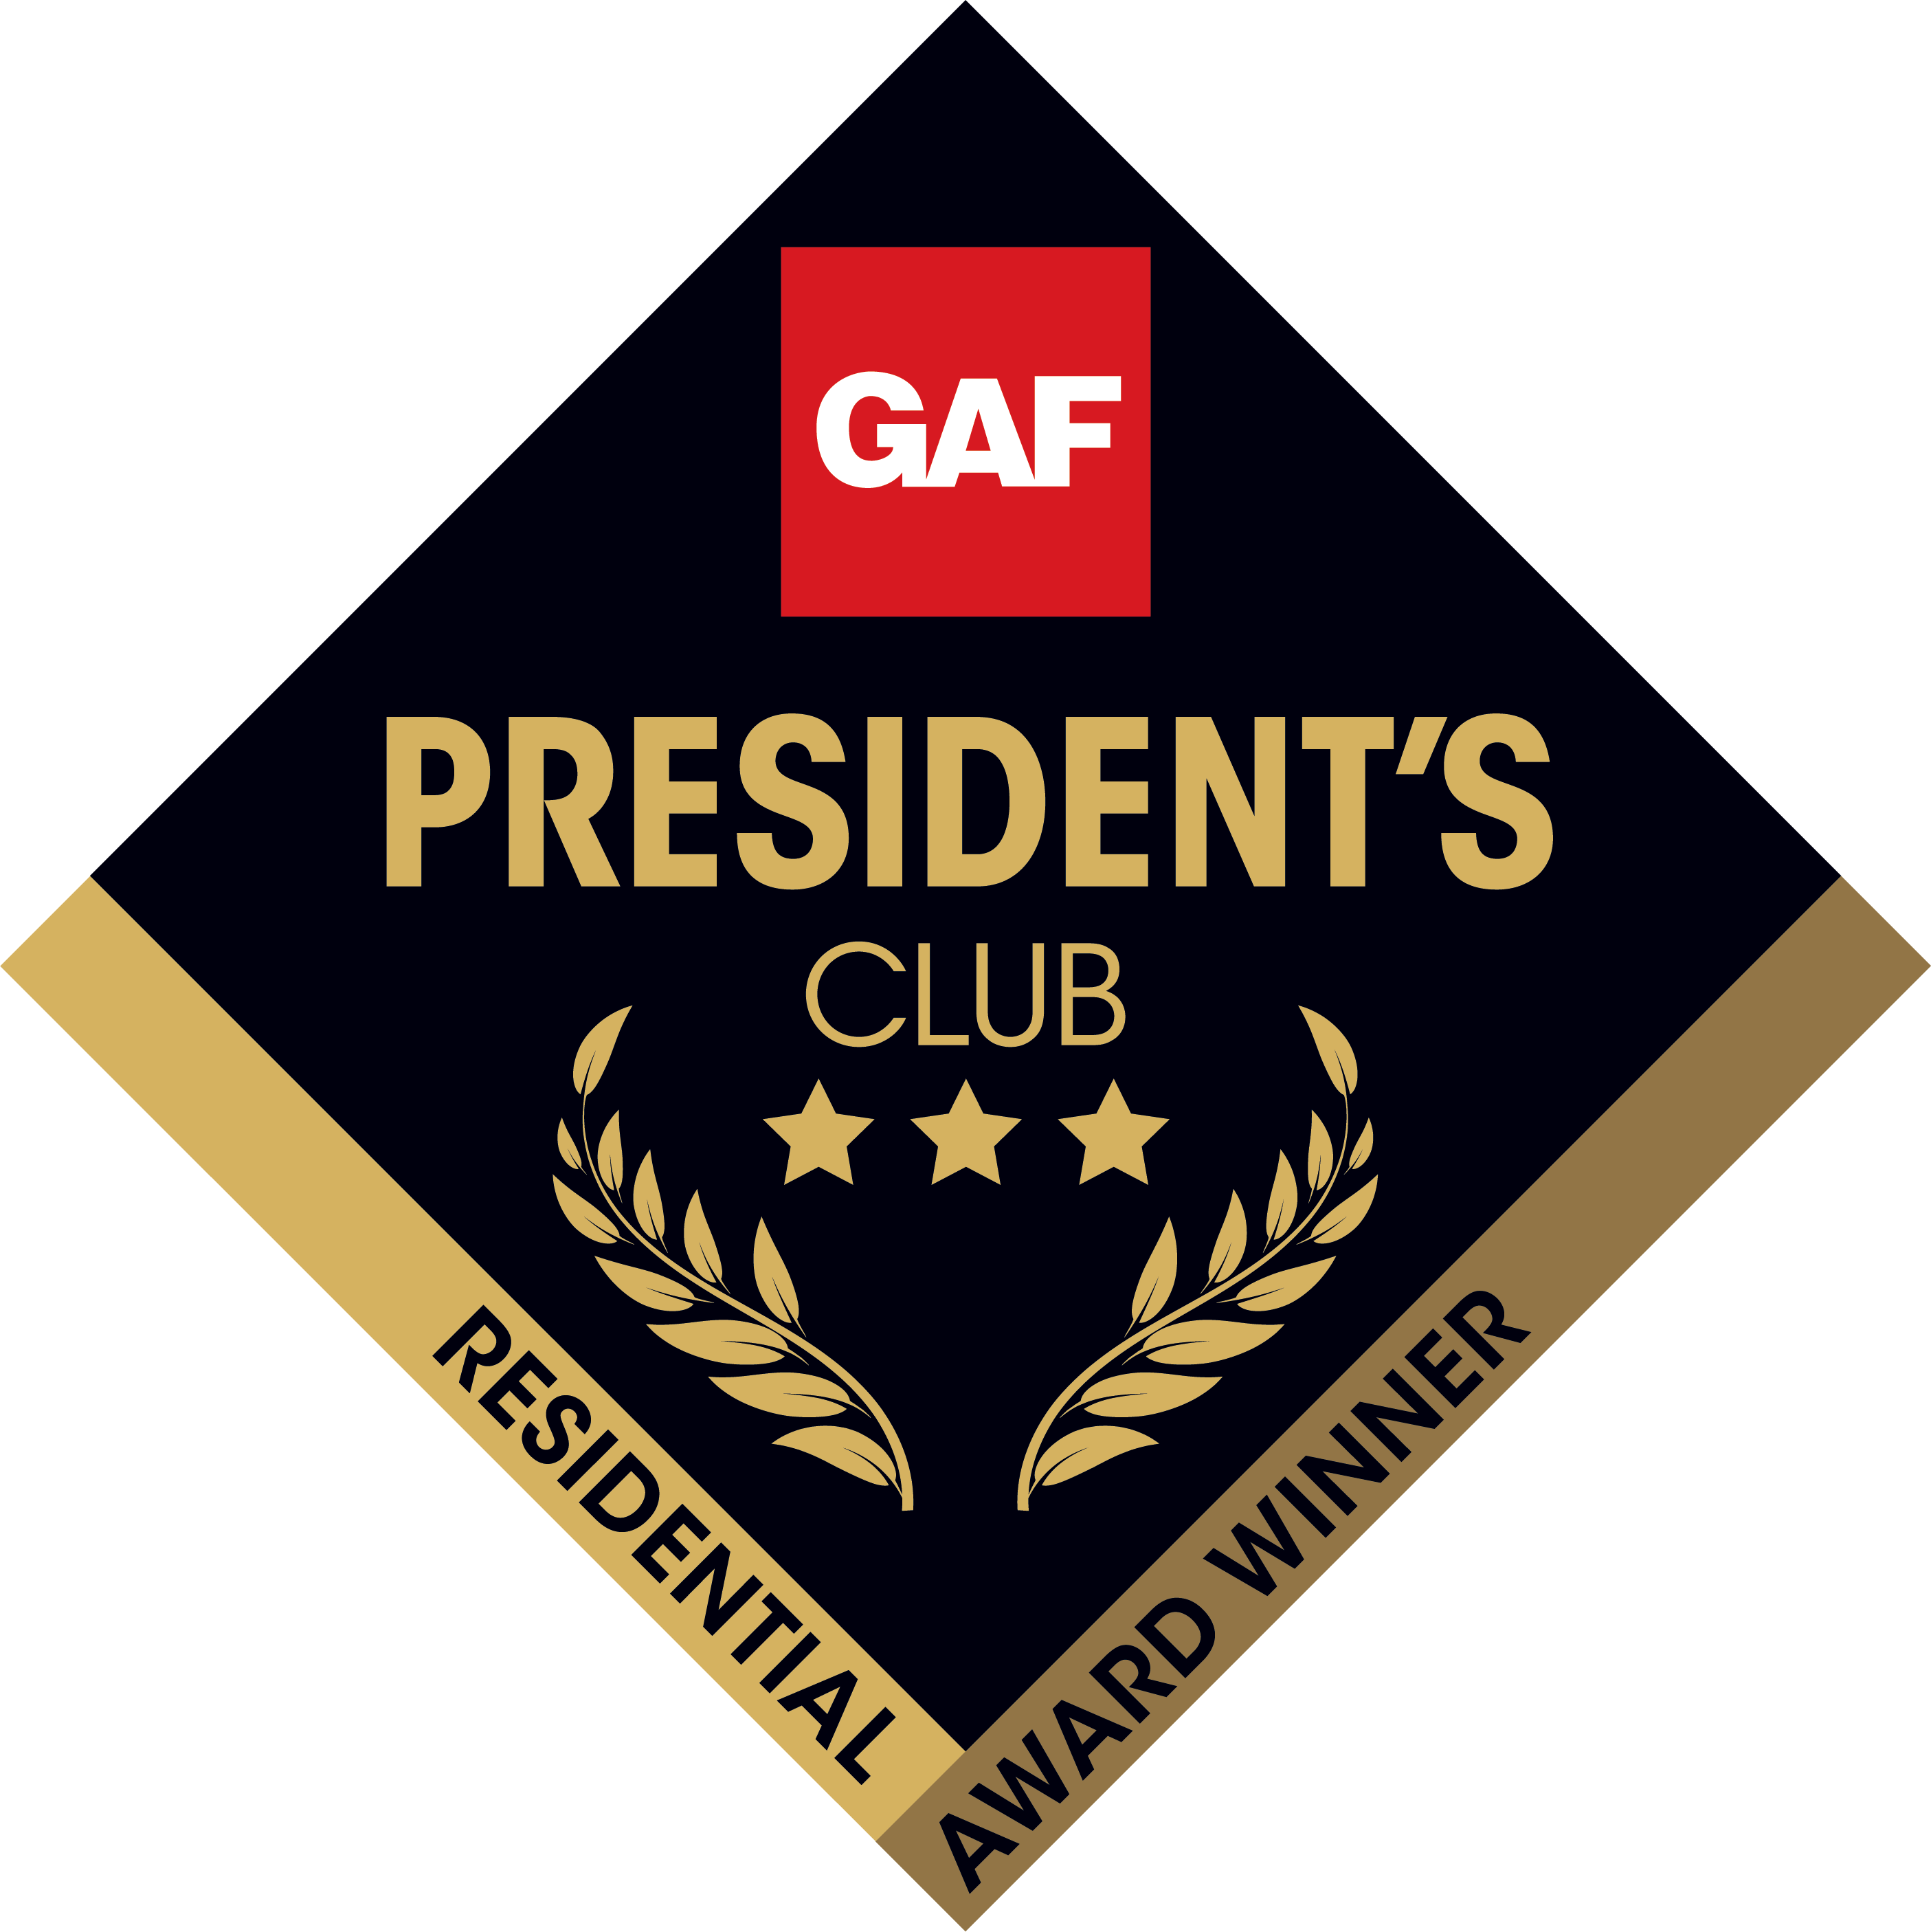 GAF president's club roofing contractor rapid city